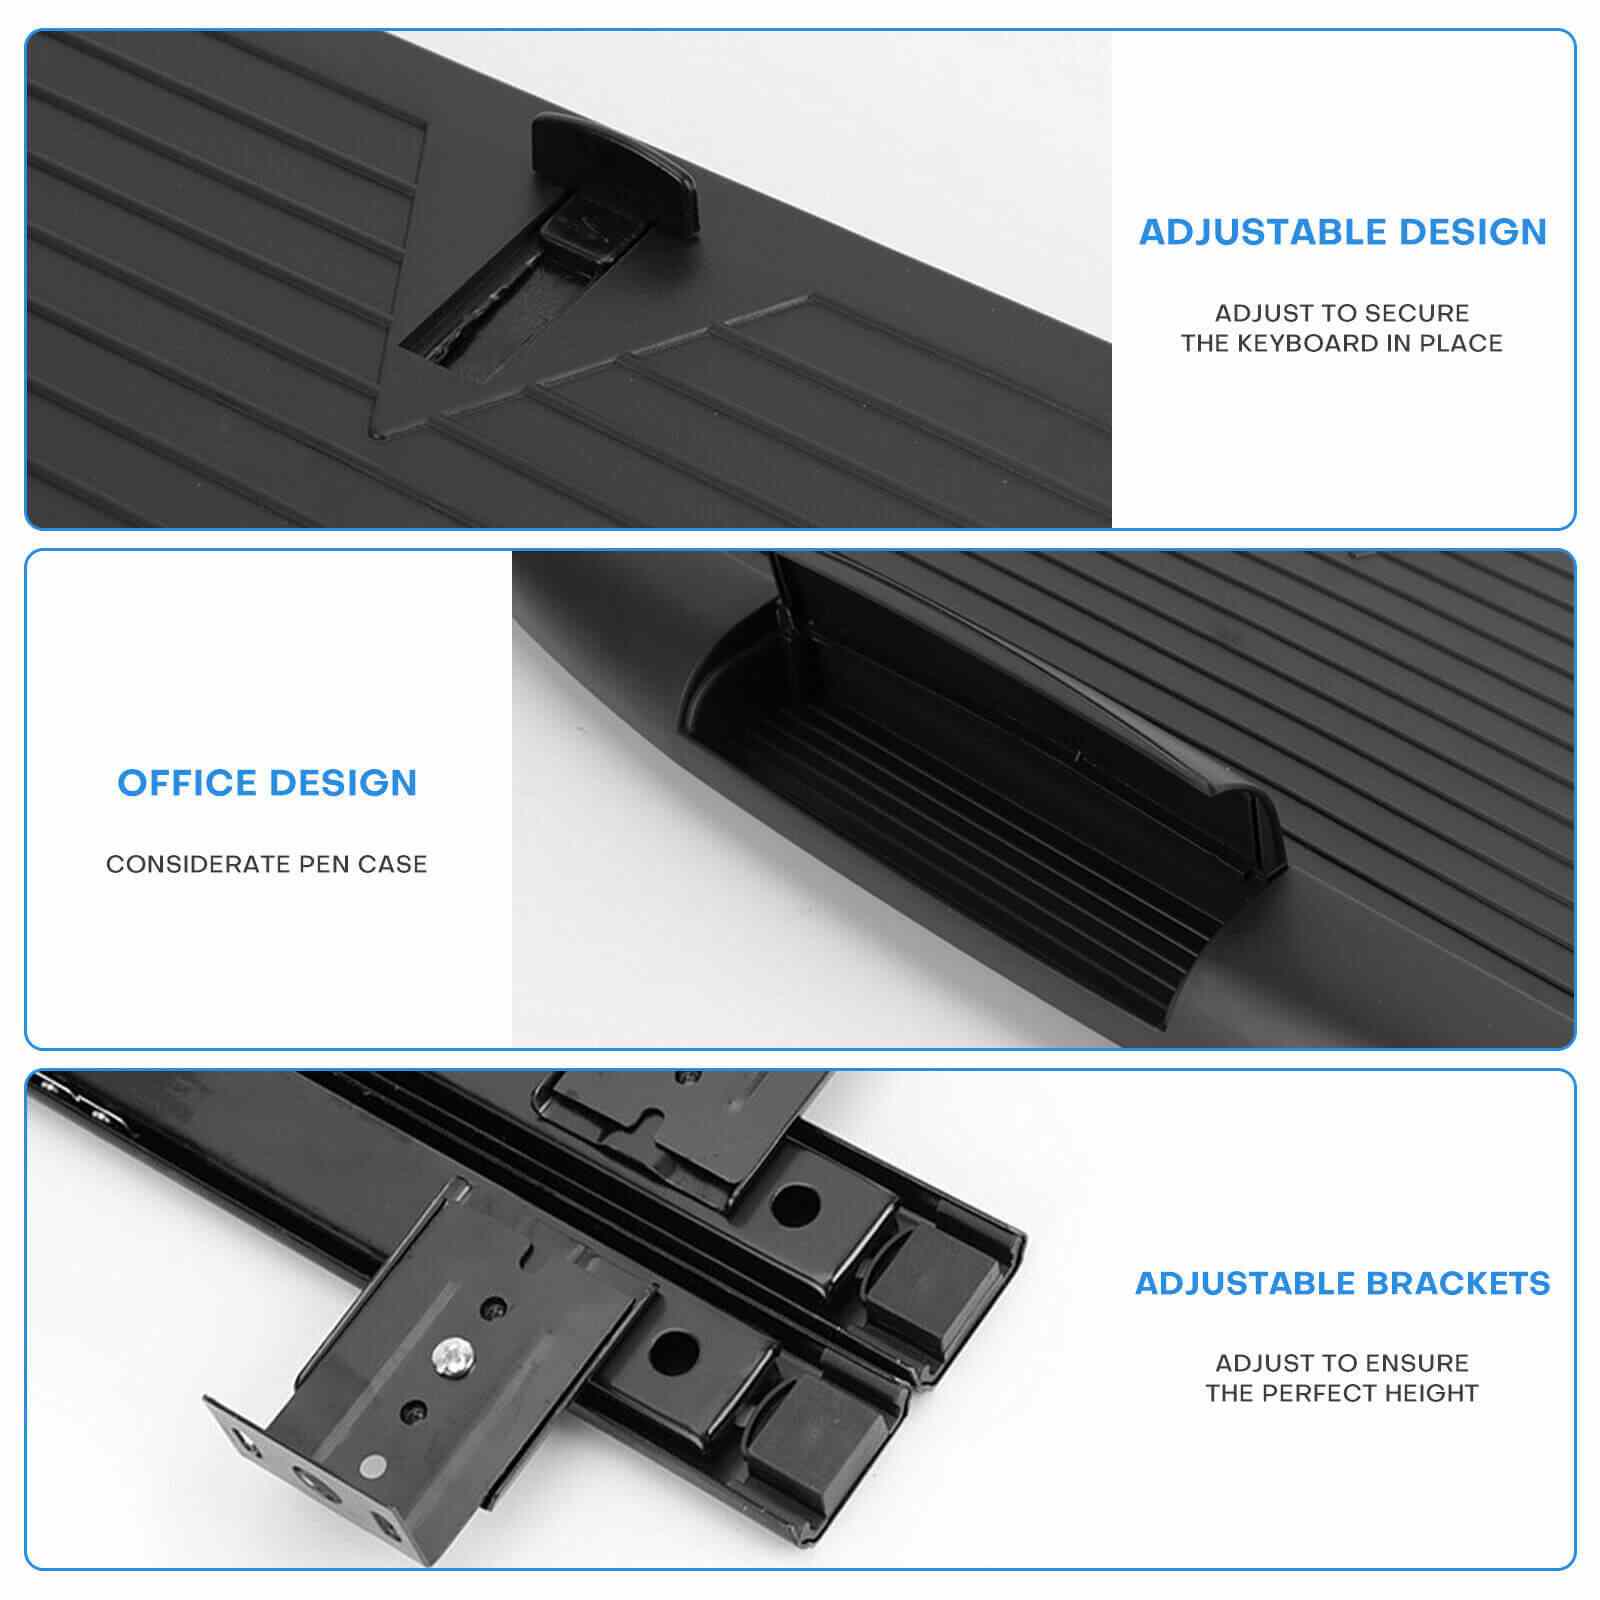 Design of Under Desk Keyboard Drawer w/ Rotatable Mouse Tray